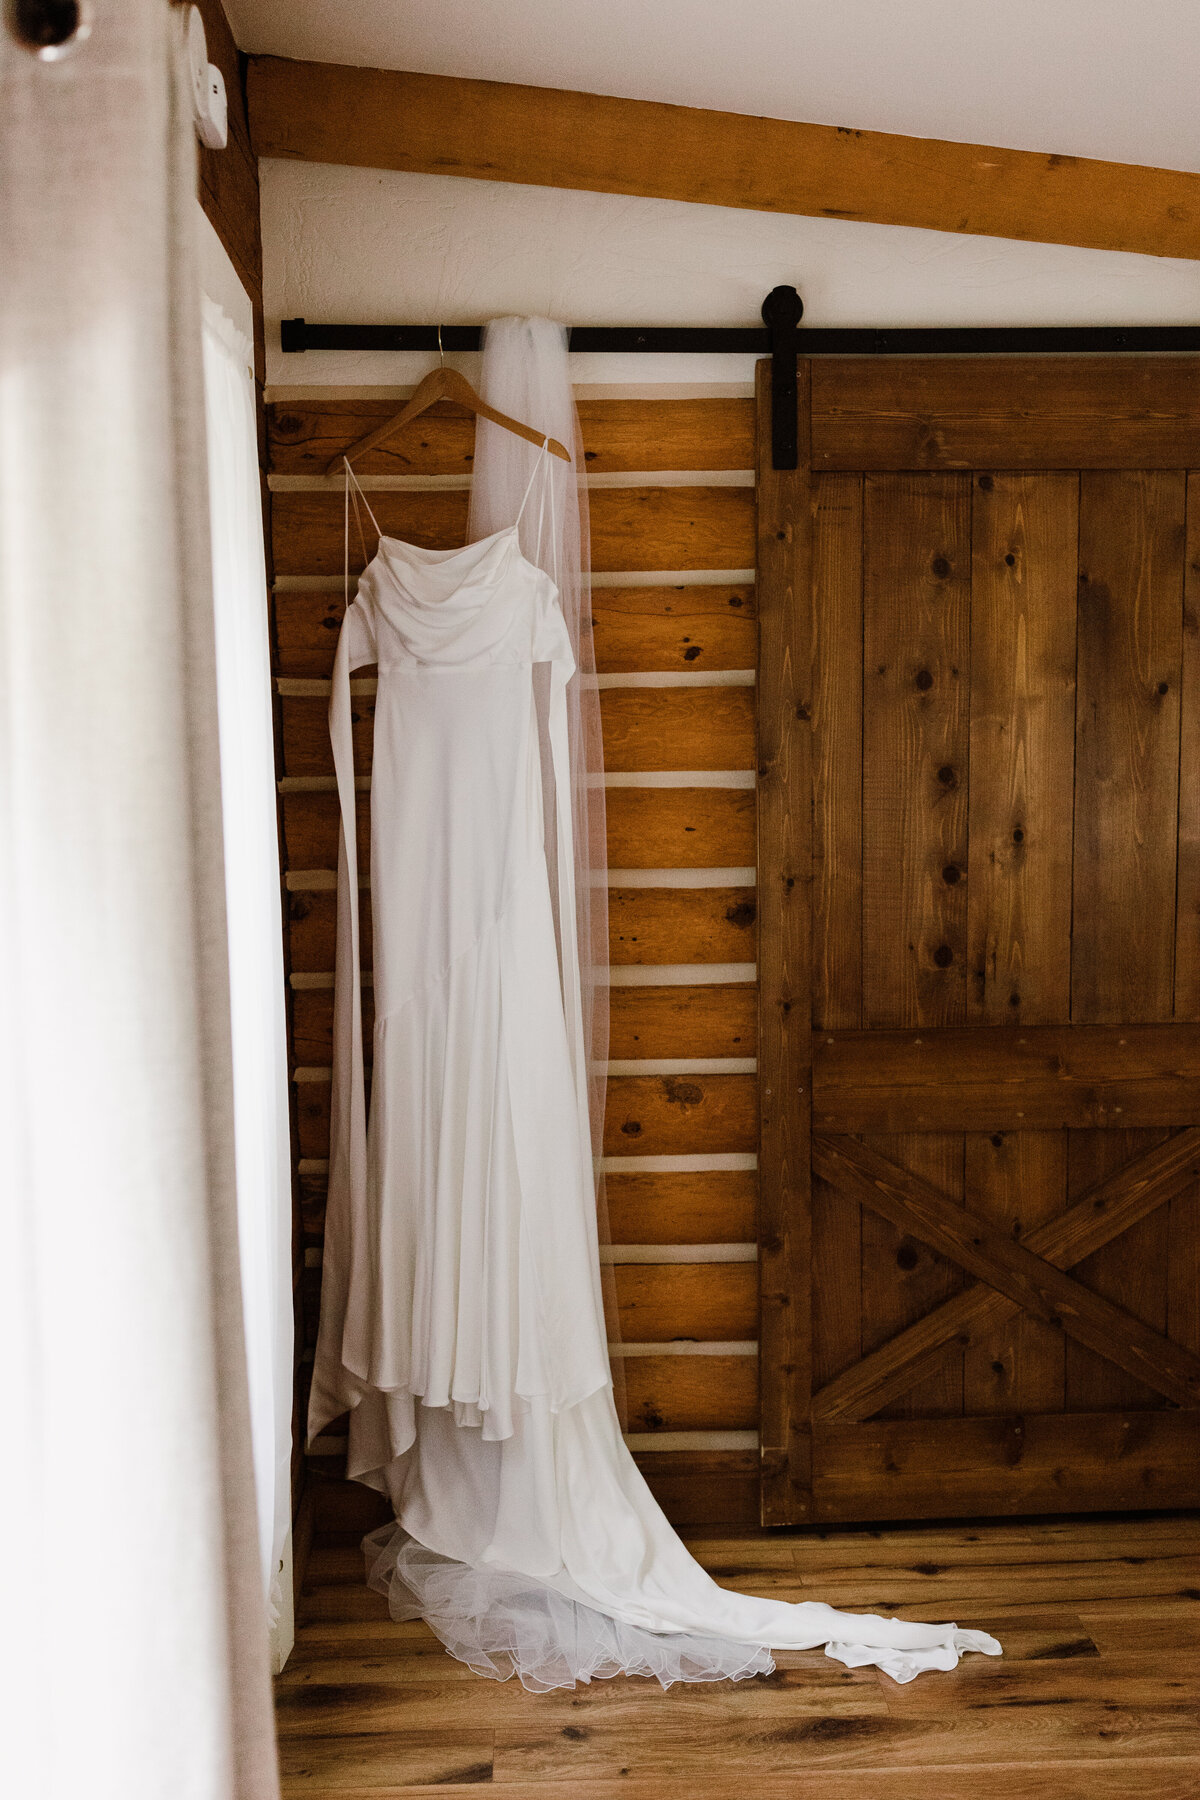 Bridal gown hung against brick wall and wooden door.